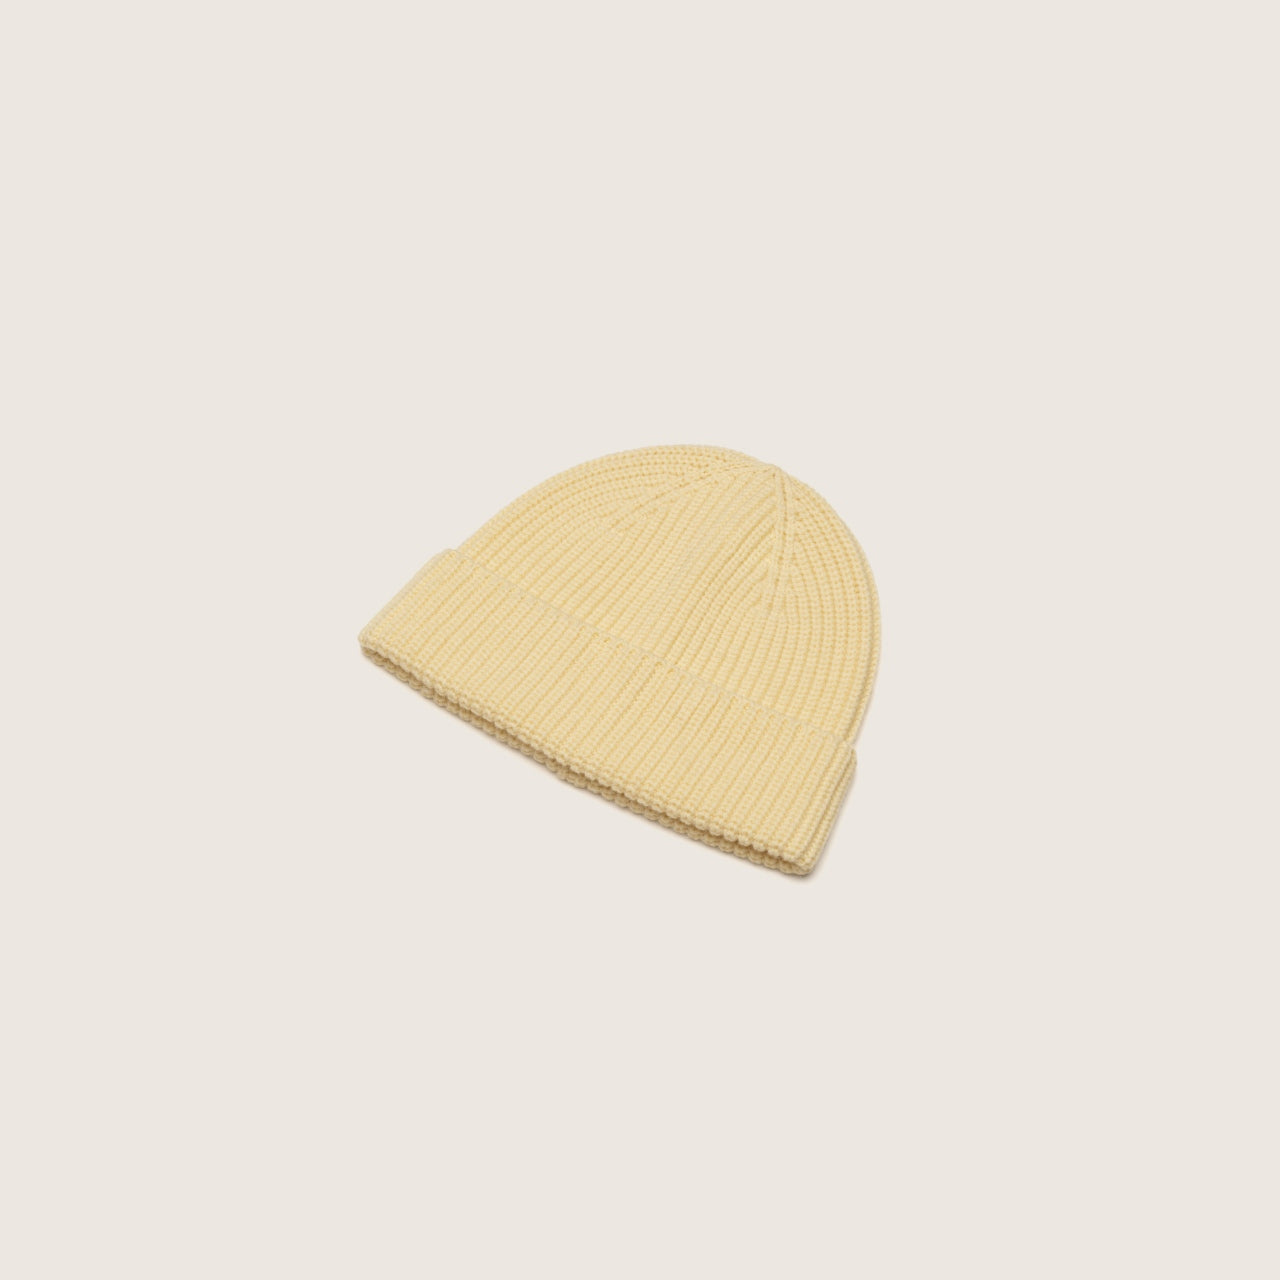 Product image of the Little Bambi Custard butter knit beanie